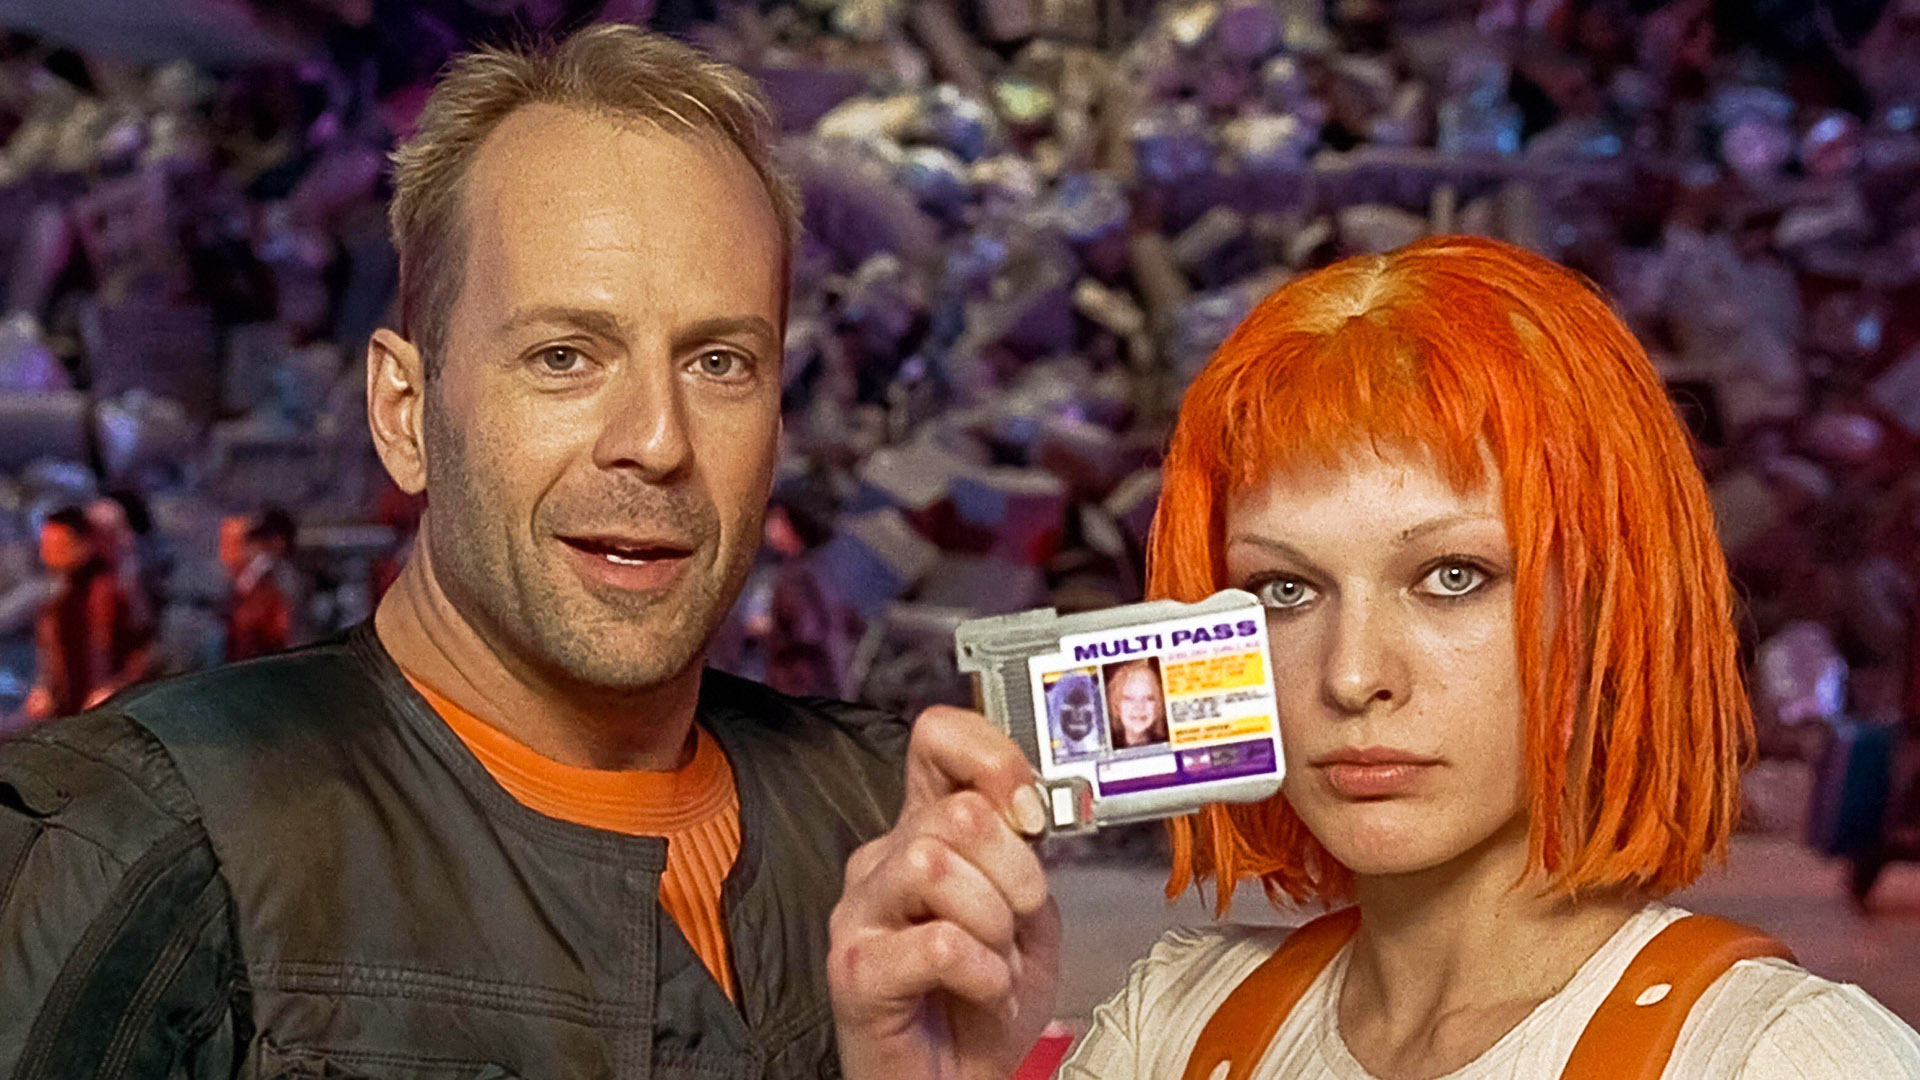 Where Are They Now? See the Cast of Fifth Element 26 Years Later